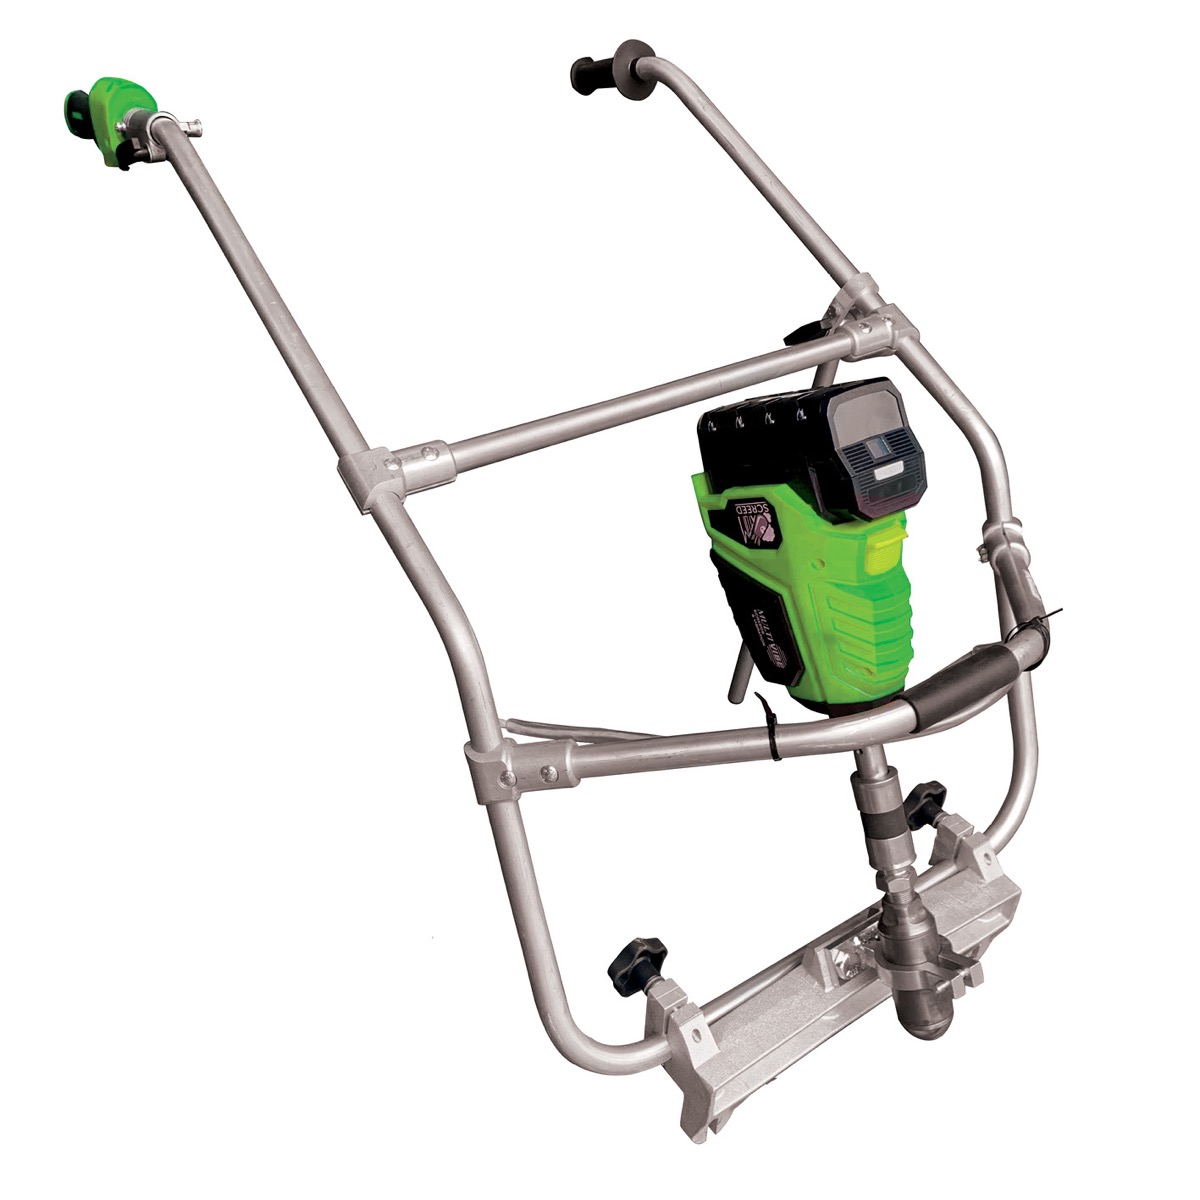 Battery powered screeds by Speedcrete. Level and vibrate your concrete indoors or outdoors with ease. This low noise unit has no fumes and special vibration reduction handles. Available in the United Kingdom and can be shipped.